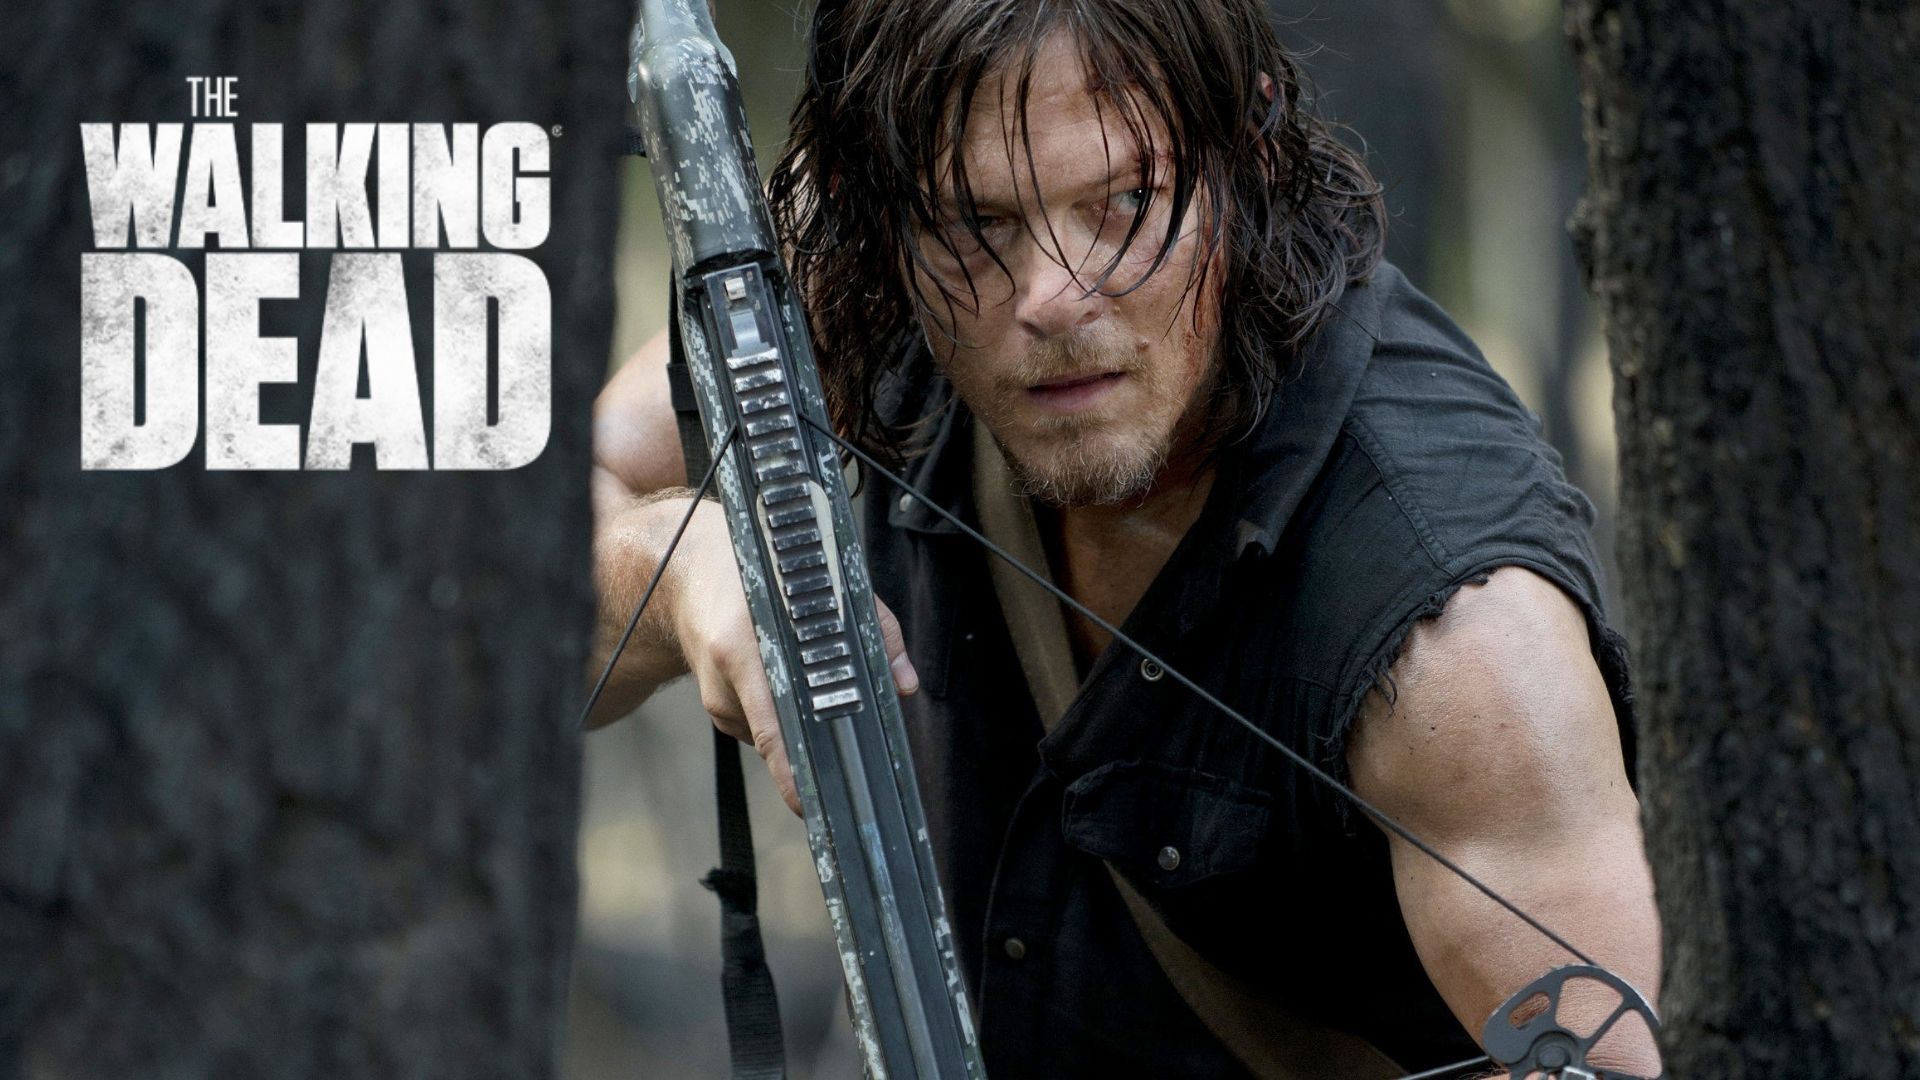 Leaked: Walking Dead Season 11 will be its last, Daryl spinoff for 2023